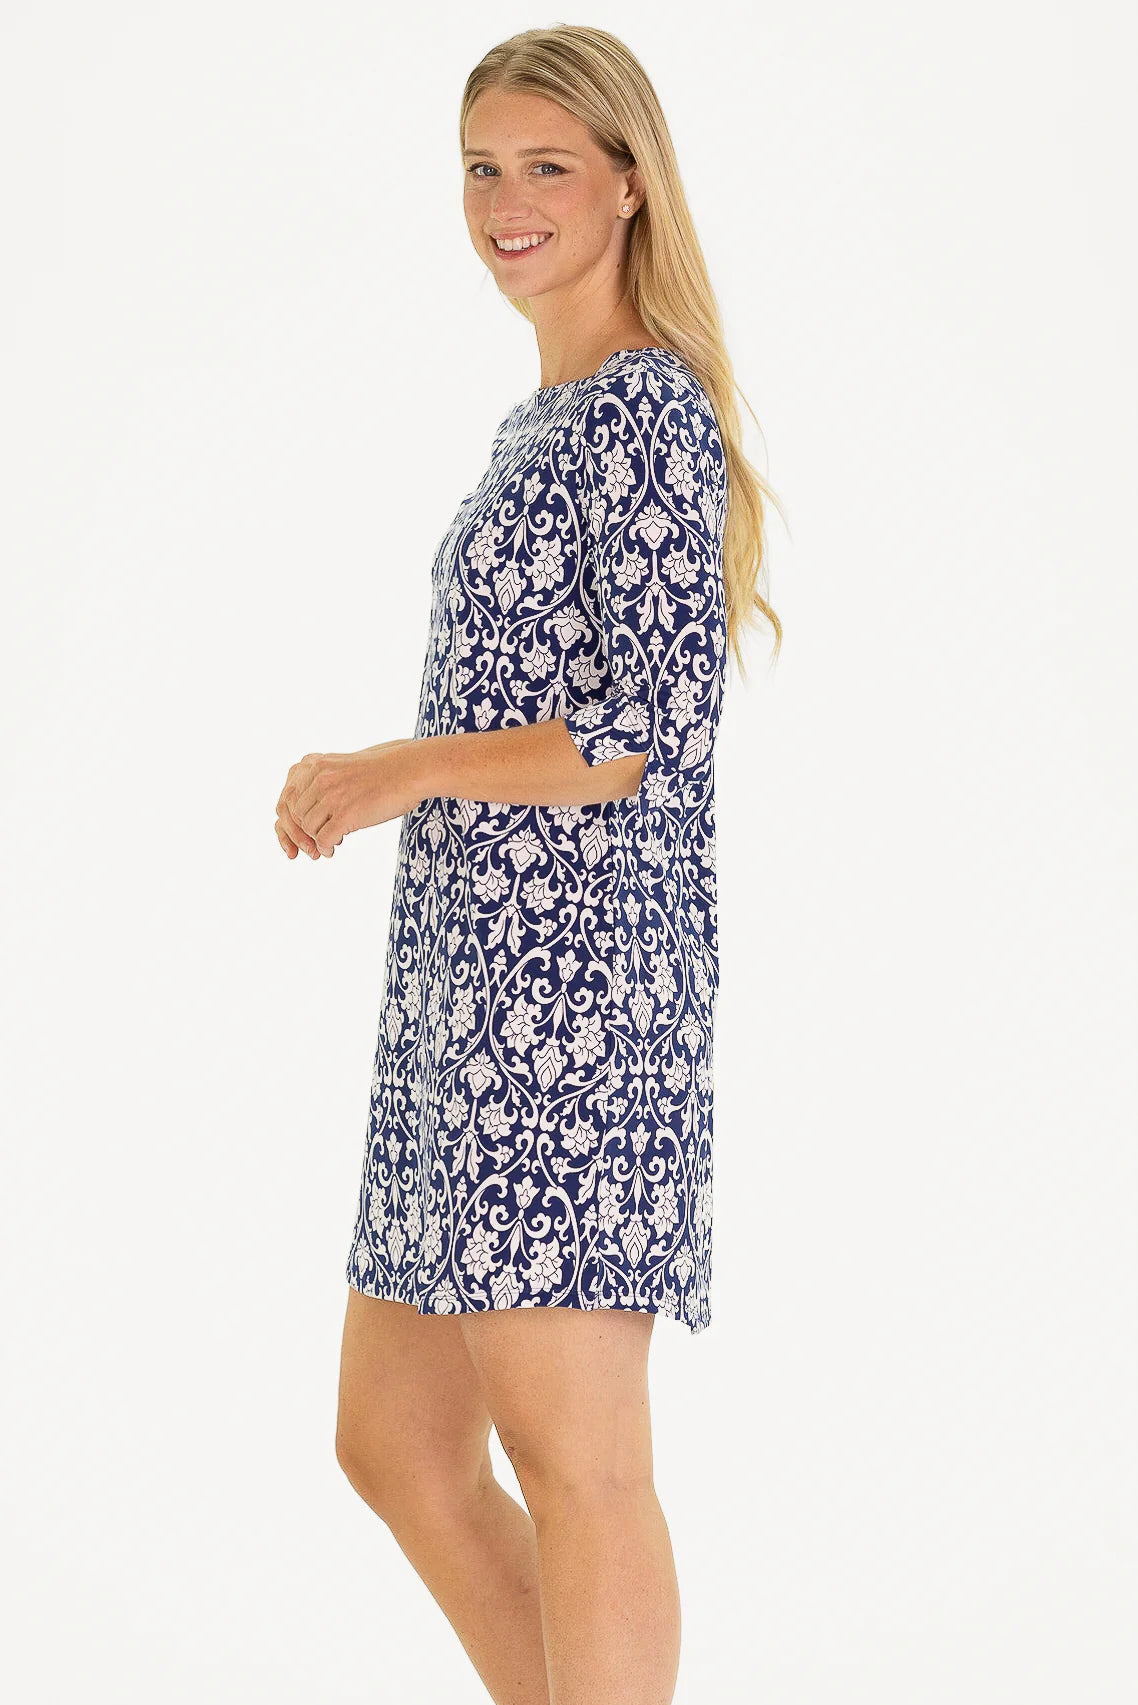 The Alicia Dress in Navy Filigree by Duffield Lane